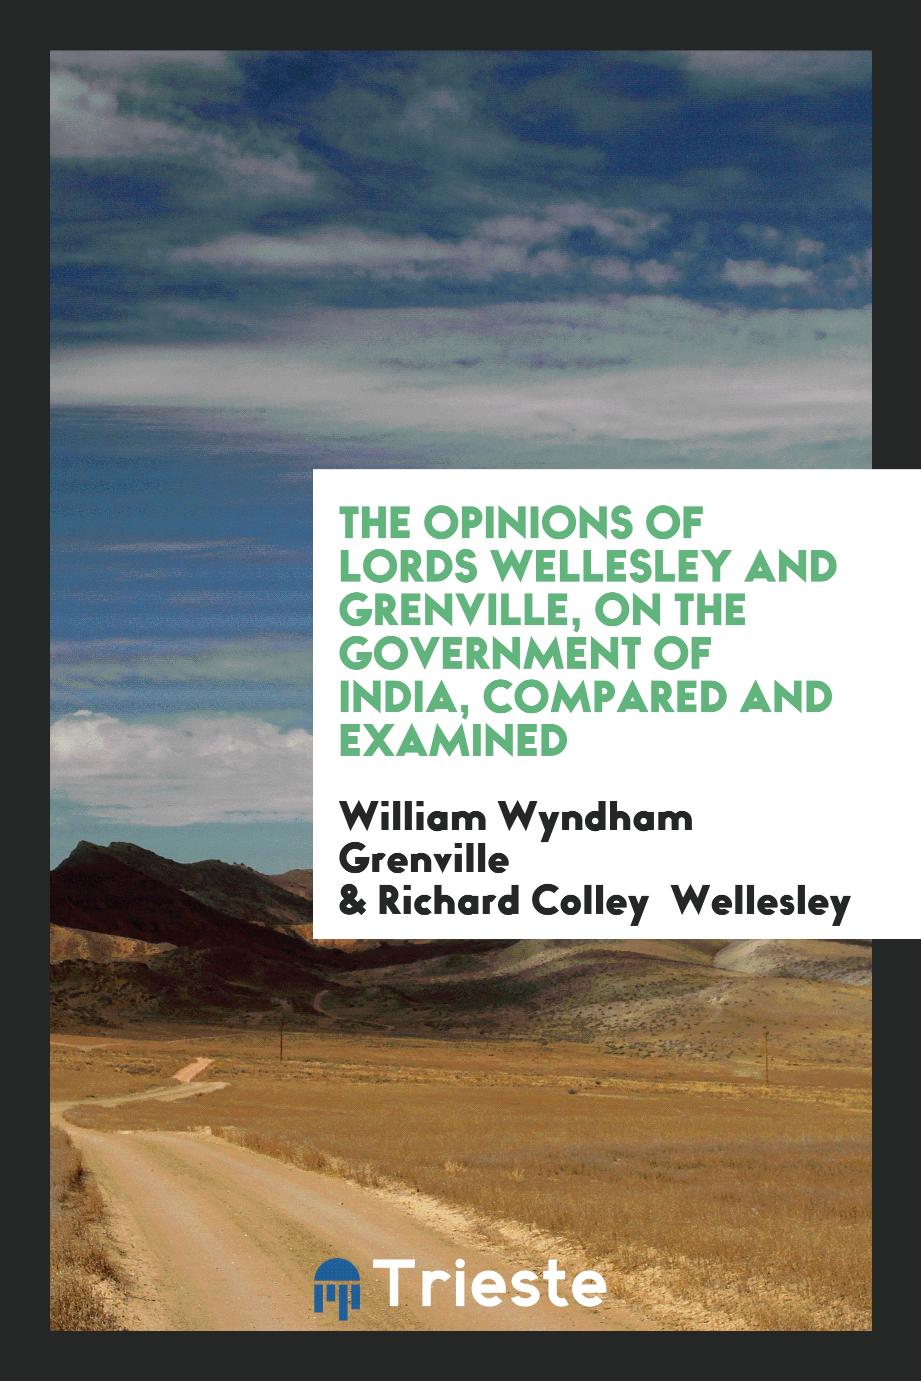 The Opinions of Lords Wellesley and Grenville, on the Government of India, Compared and Examined